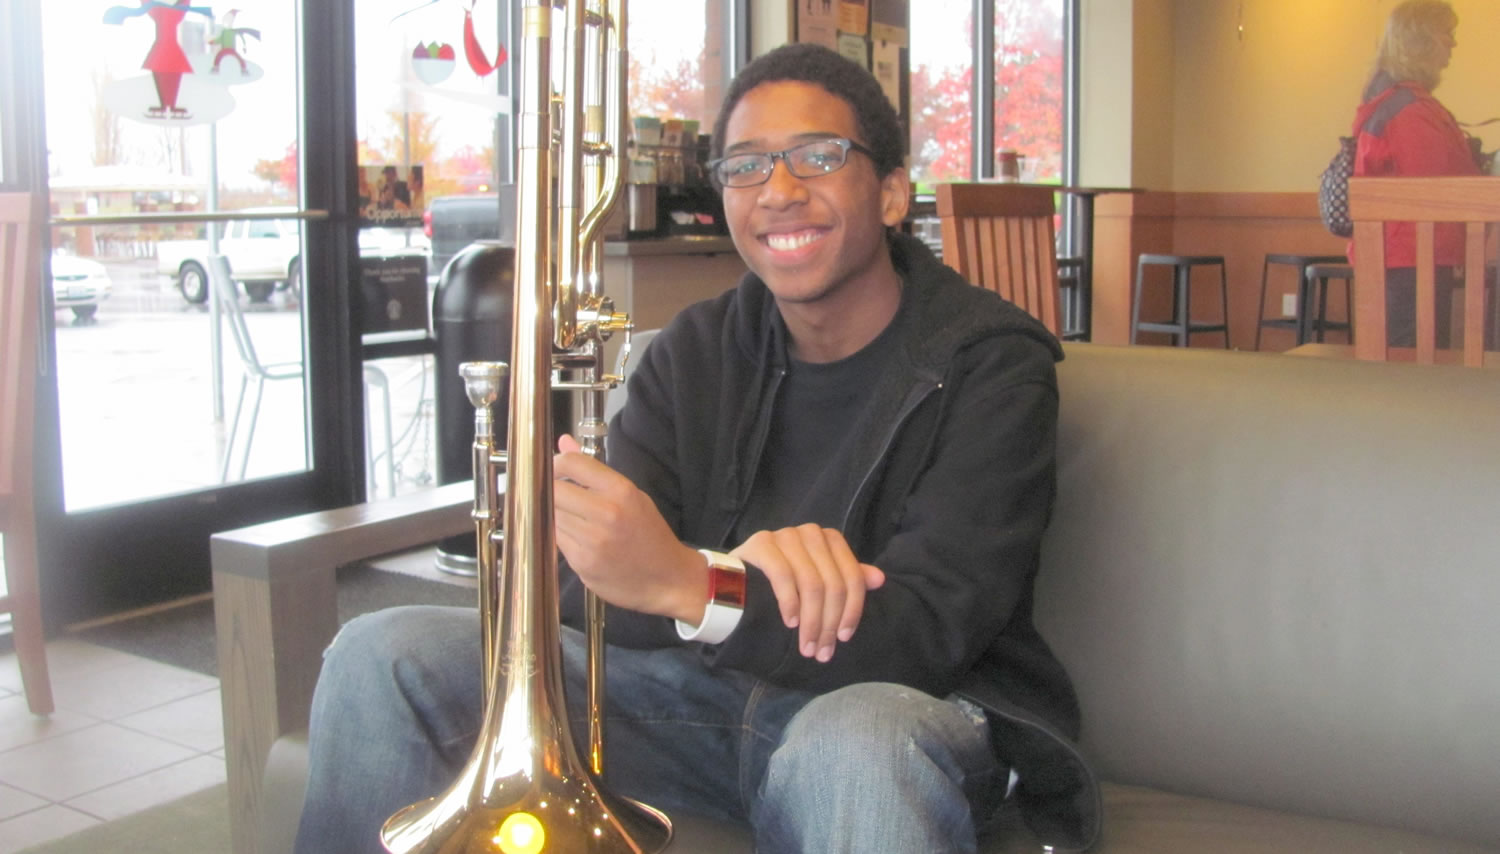 Union High School senior Micah Lewis will play his trombone in the Macy's Thanksgiving Day Parade in New York City.